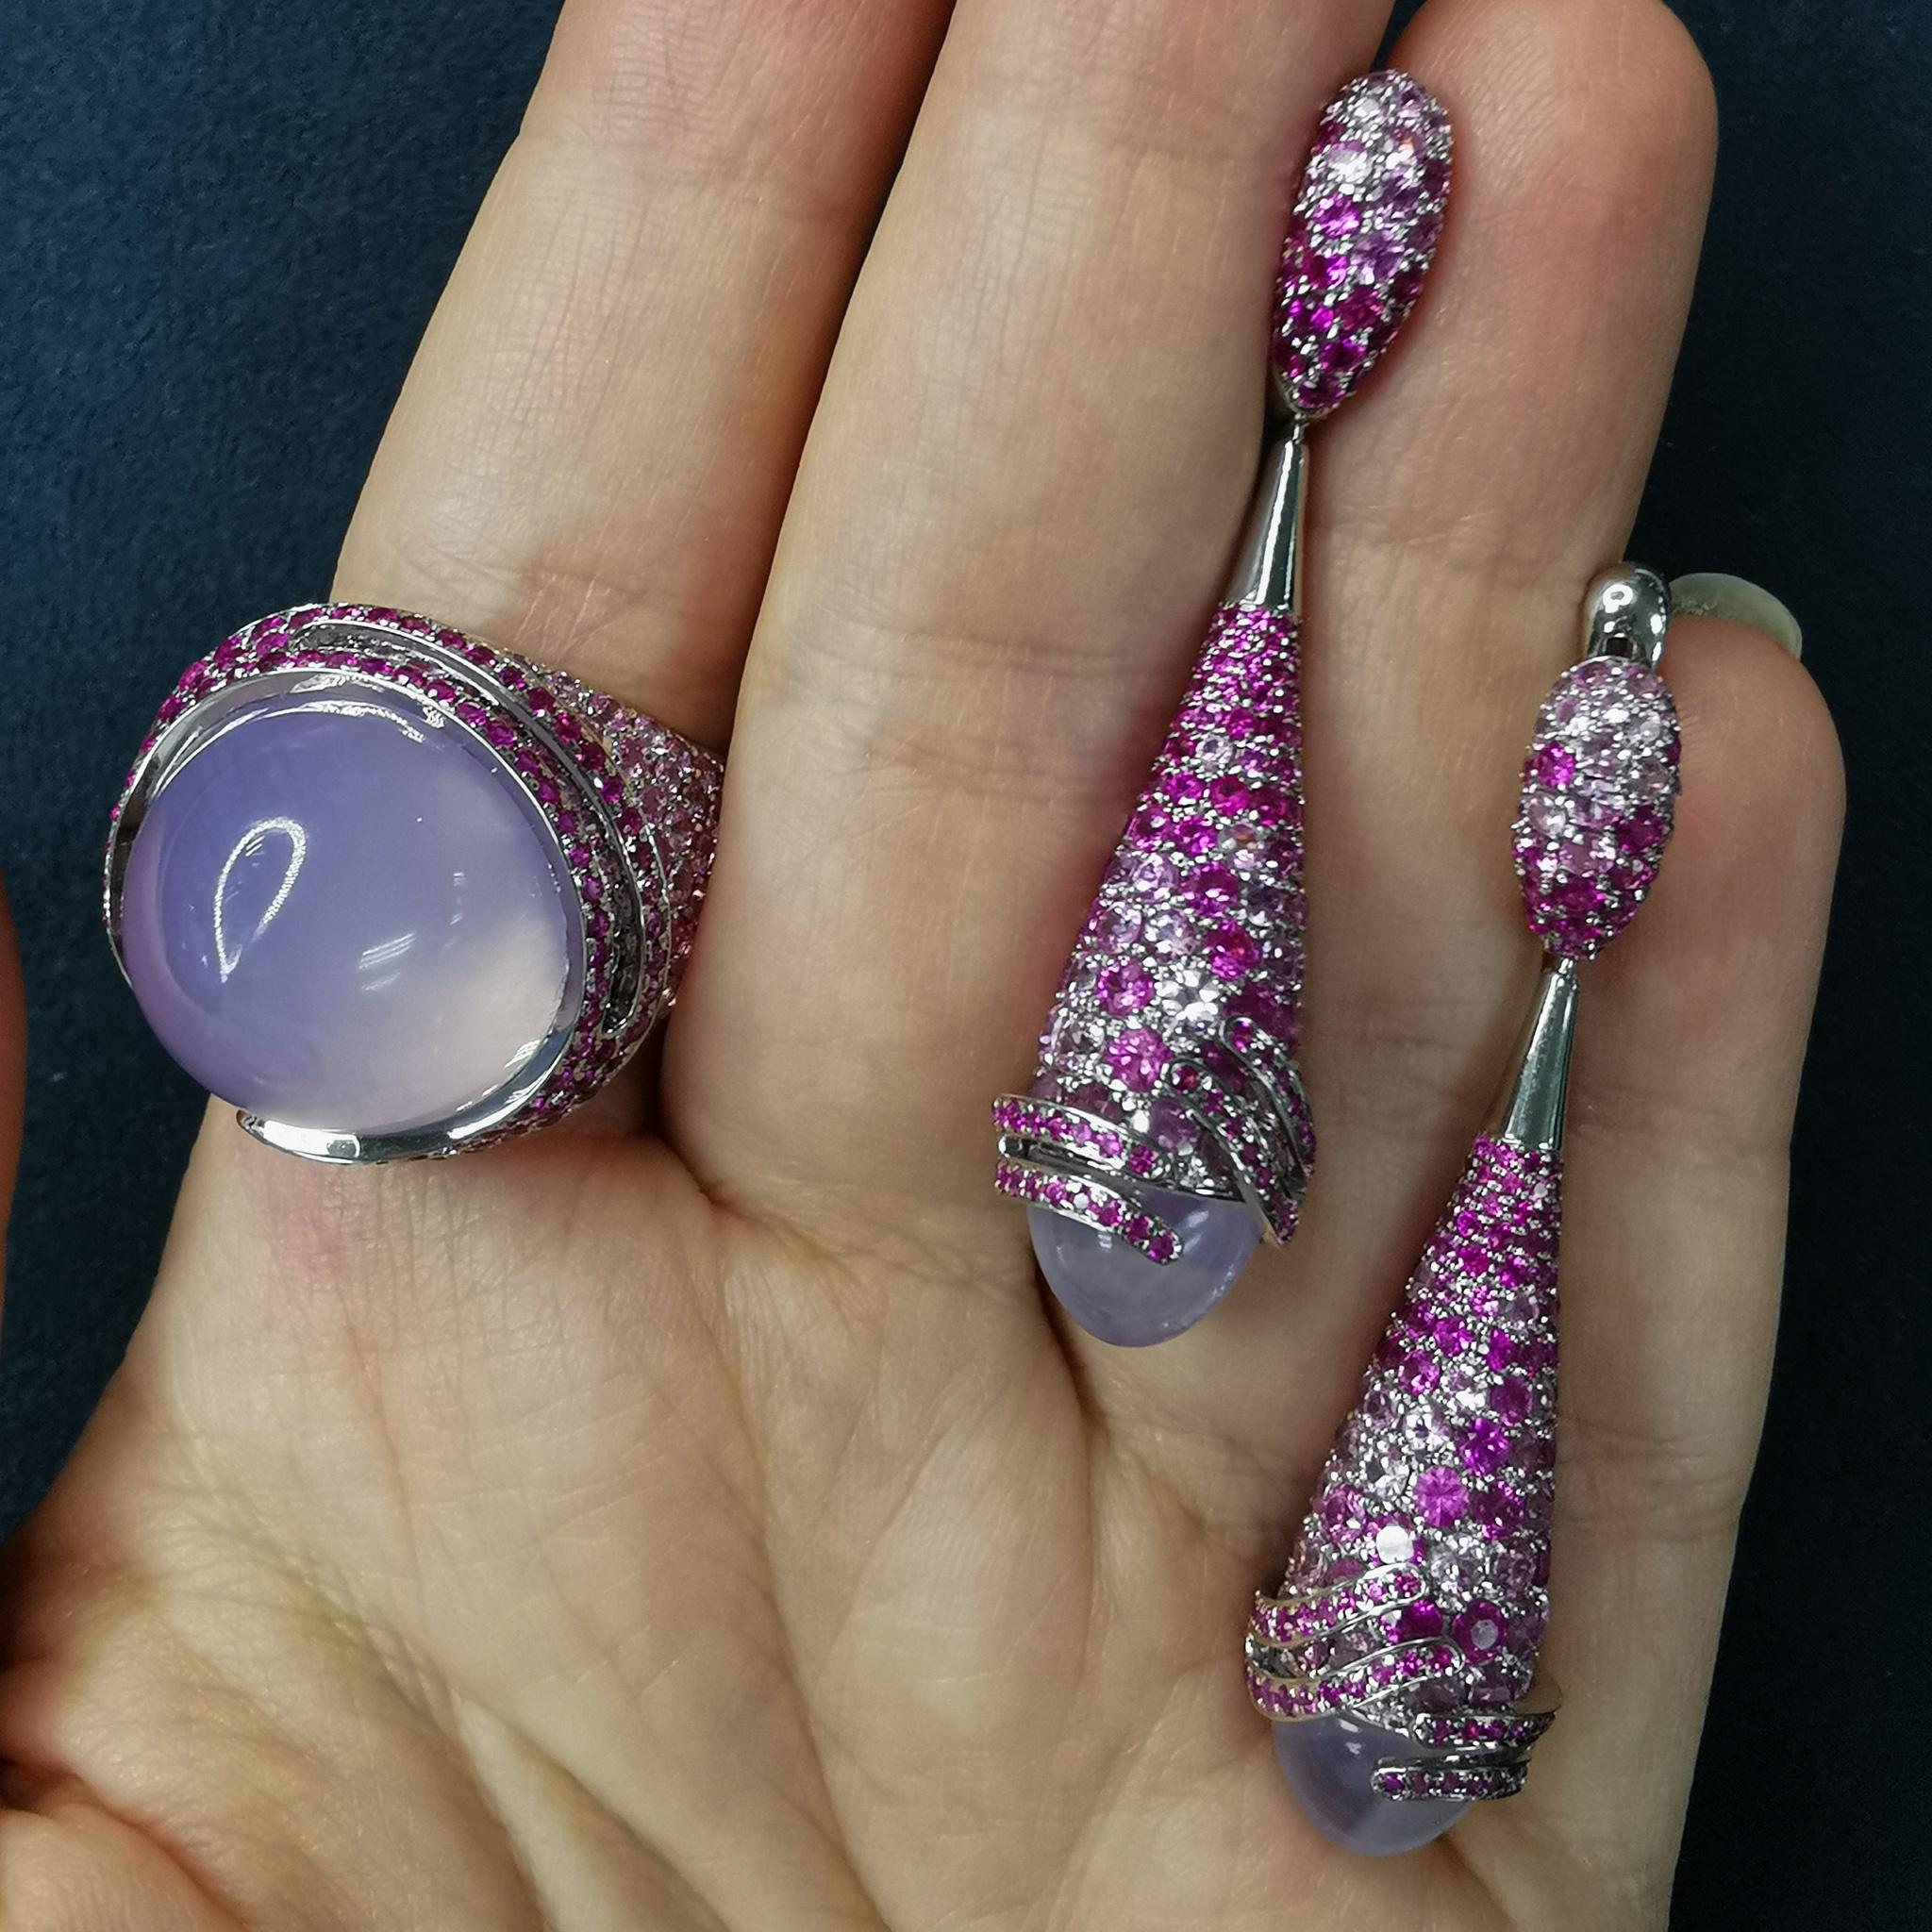 Lavender Quartz Pink Sapphires 18 Karat White Gold Fuji Suite
Series of these Rings and Earrings isn't called Fuji for nothing, since the inspiration for the creation of these products came to us exactly from the contemplation of this majestic